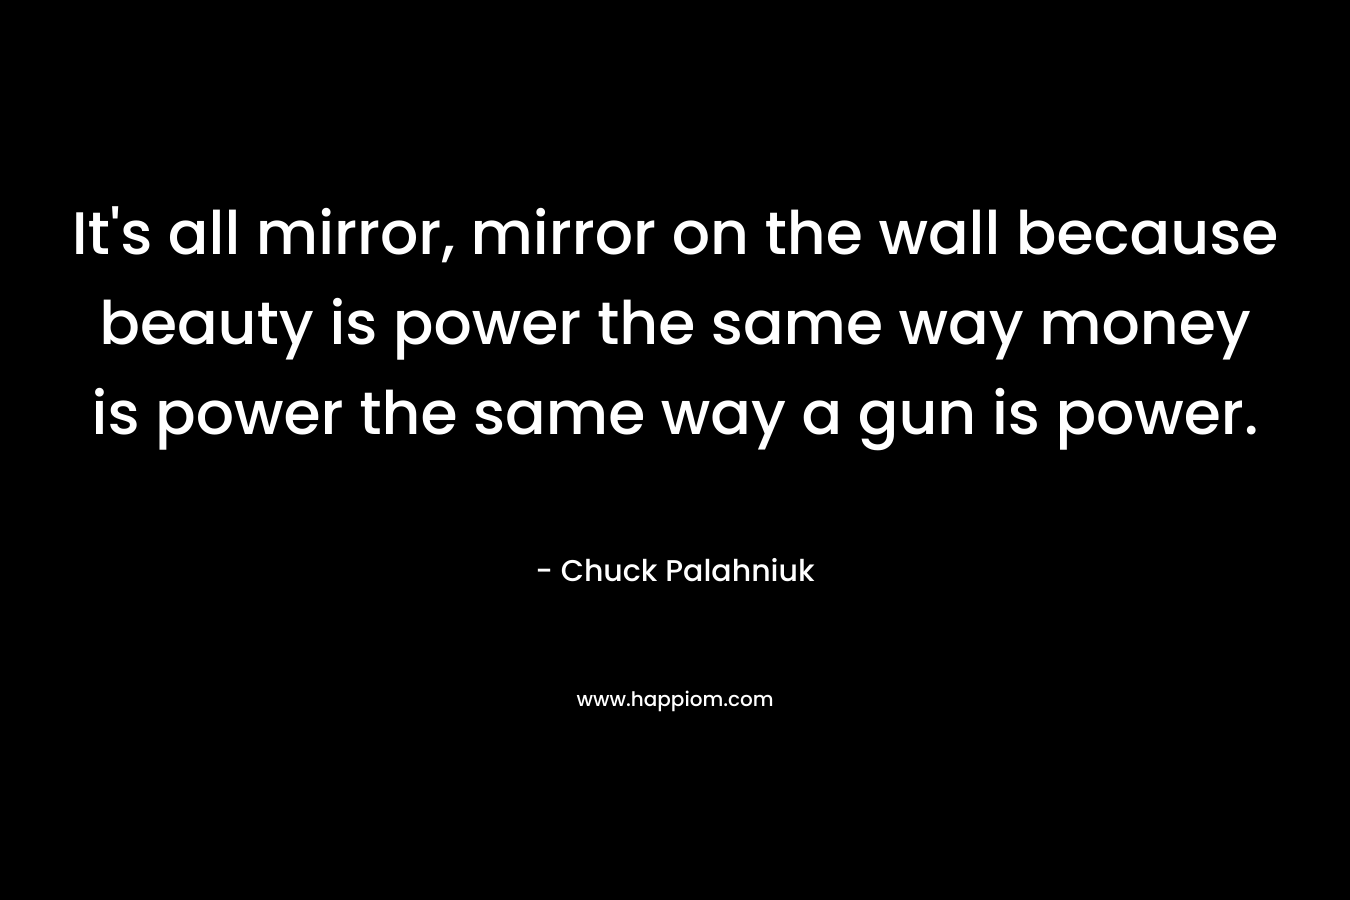 It's all mirror, mirror on the wall because beauty is power the same way money is power the same way a gun is power.